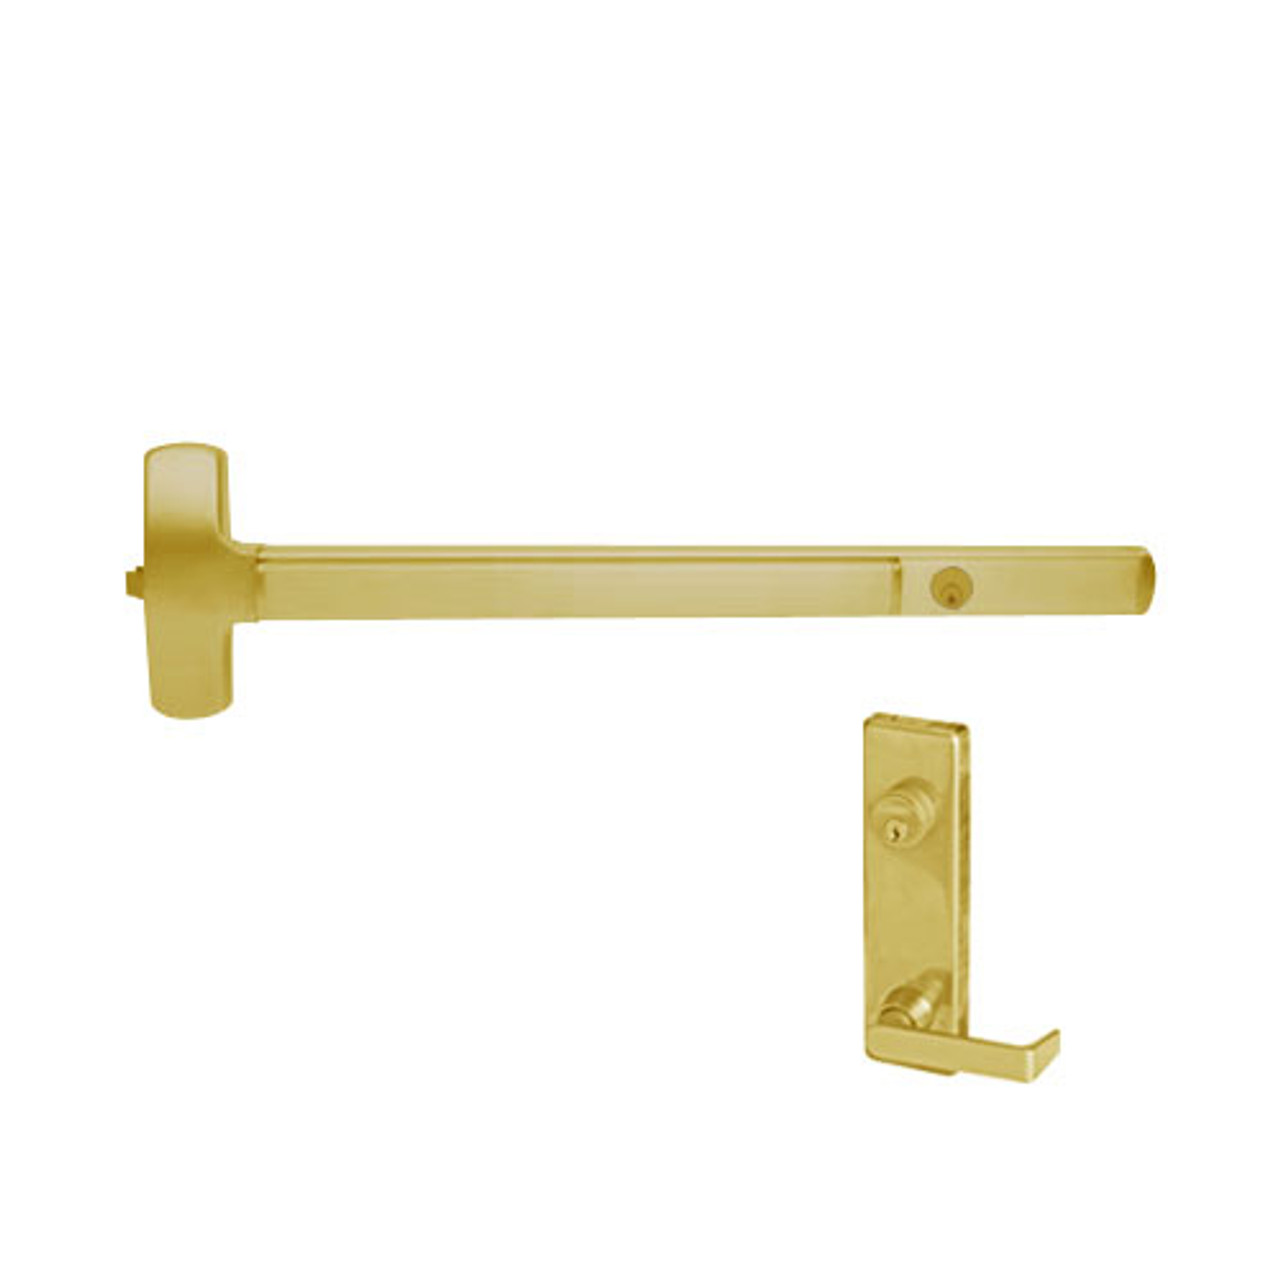 CD25-R-L-DANE-US3-3-LHR Falcon Exit Device in Polished Brass